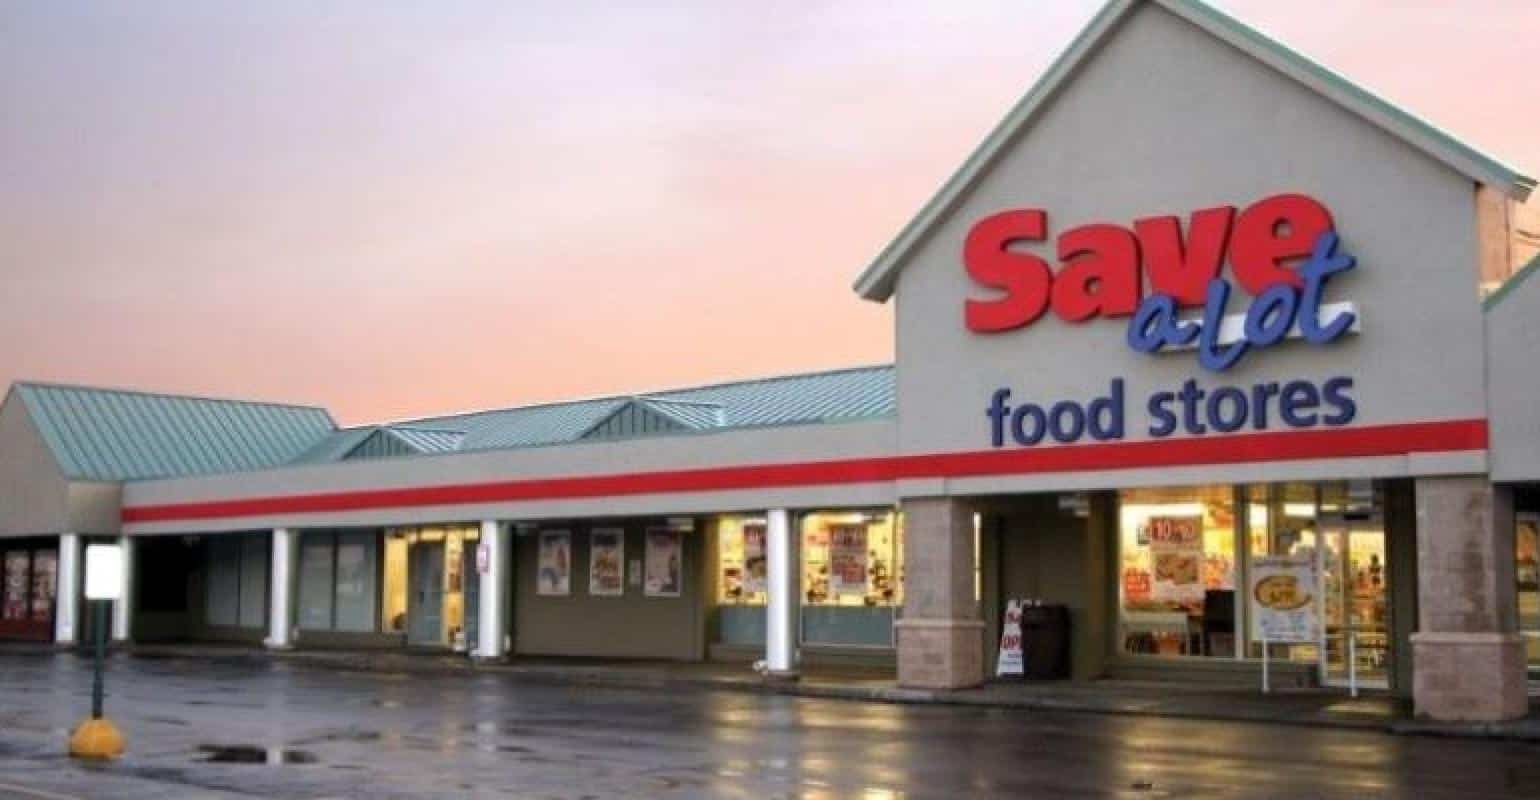 Save a lot food store exterior from parking lot